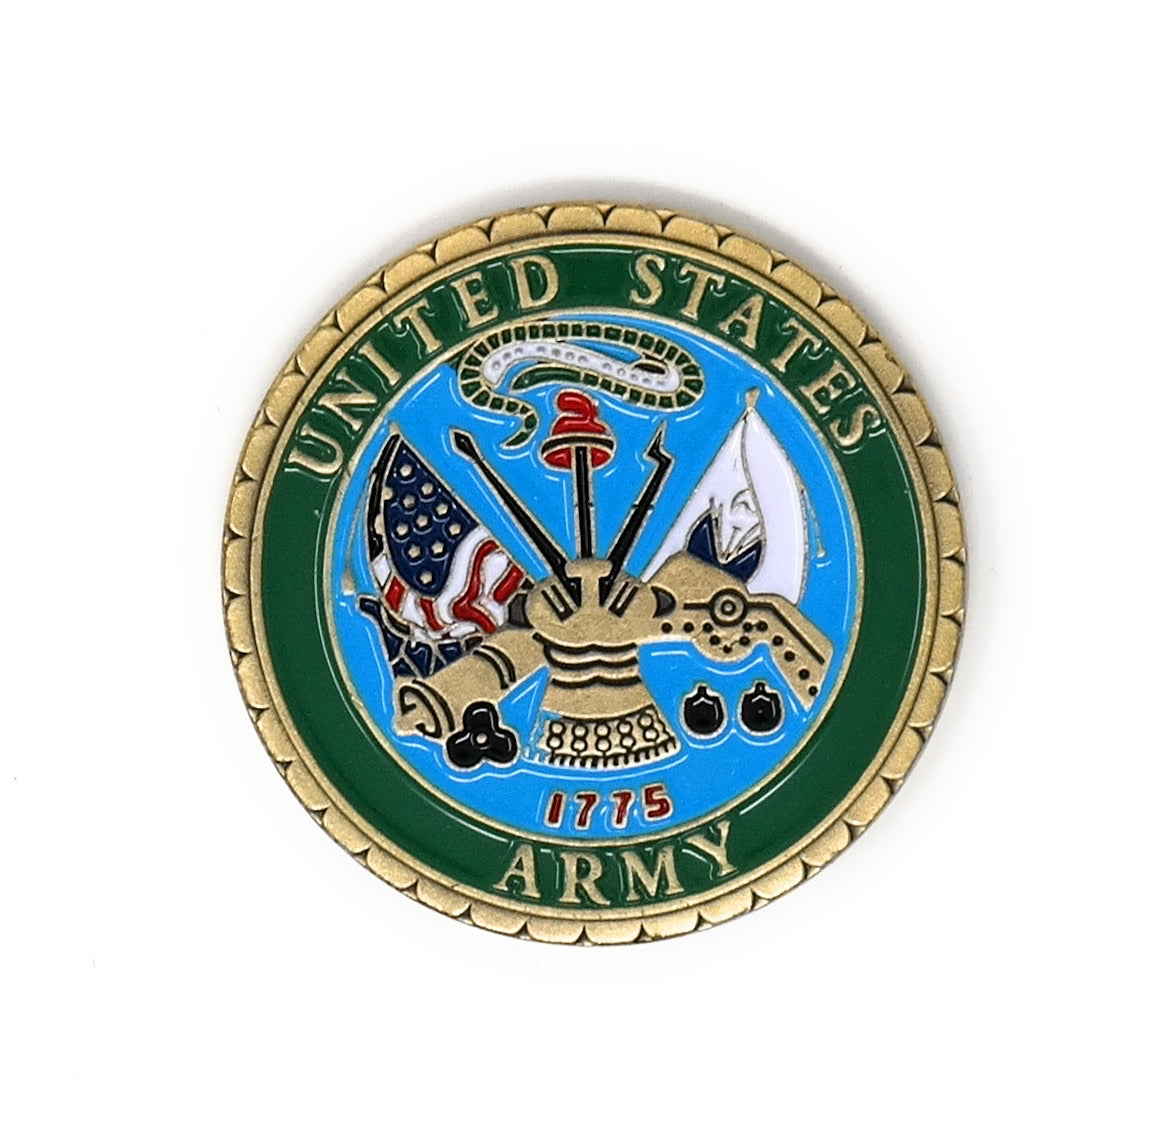 United States Army Collectable Souvenir Coin